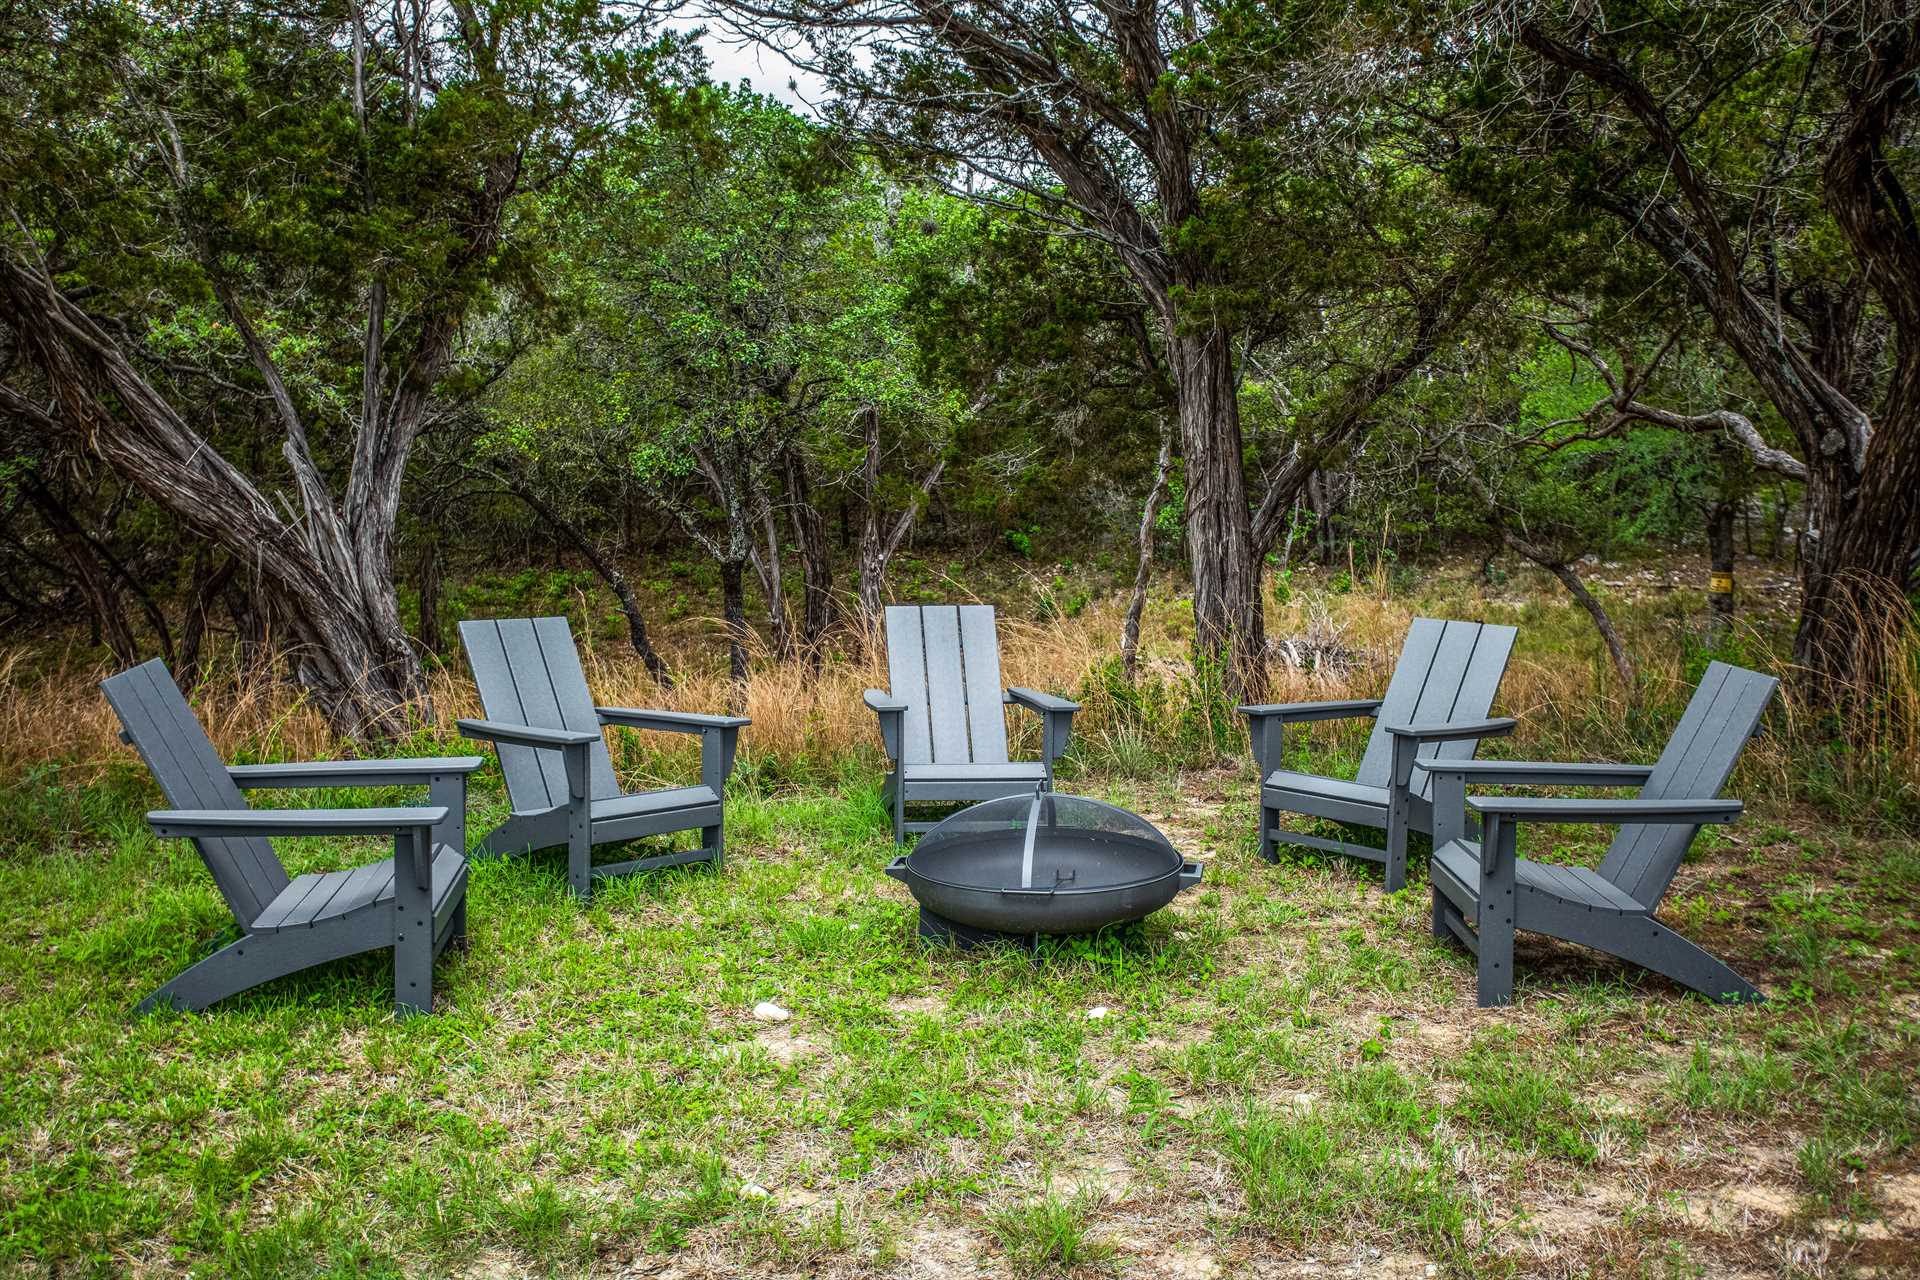                                                 Kick back and relax around the fire pit! It's a fantastic place for conversation, and for spotting local birds and wildlife, too.